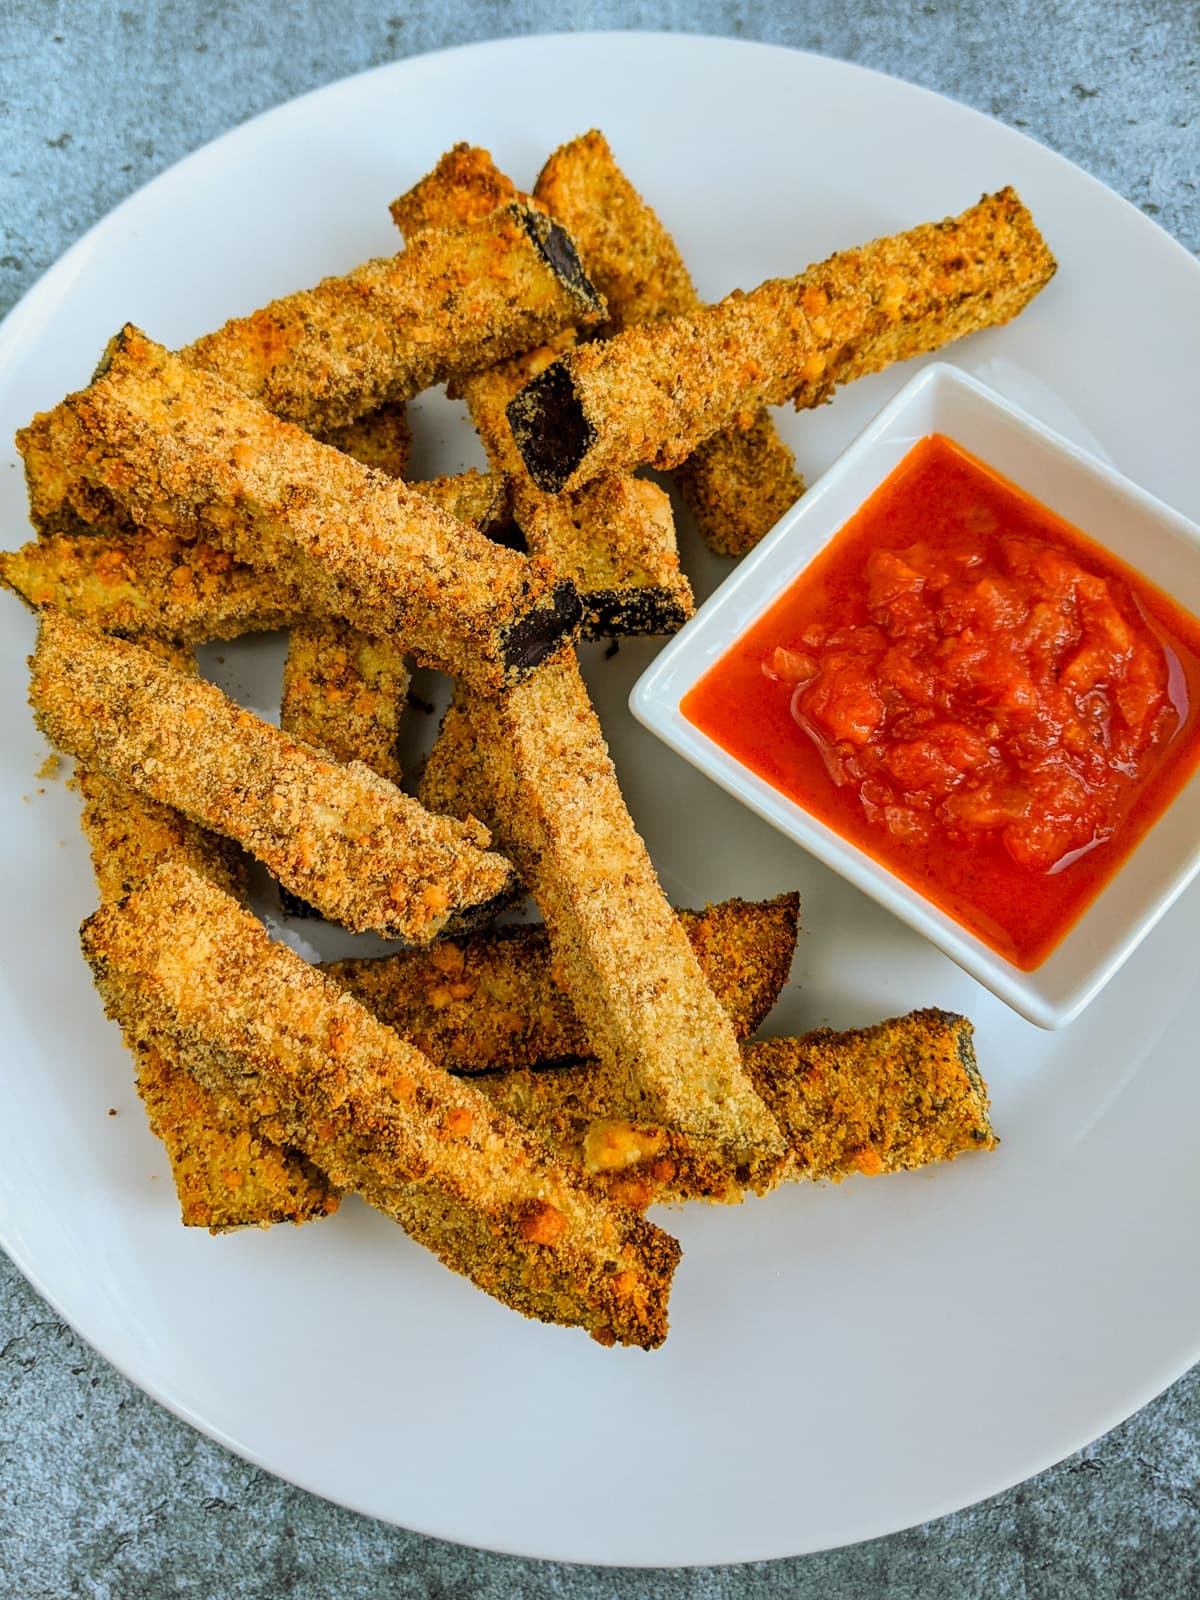 Tomato sauce with eggplant fries on a concrete table.